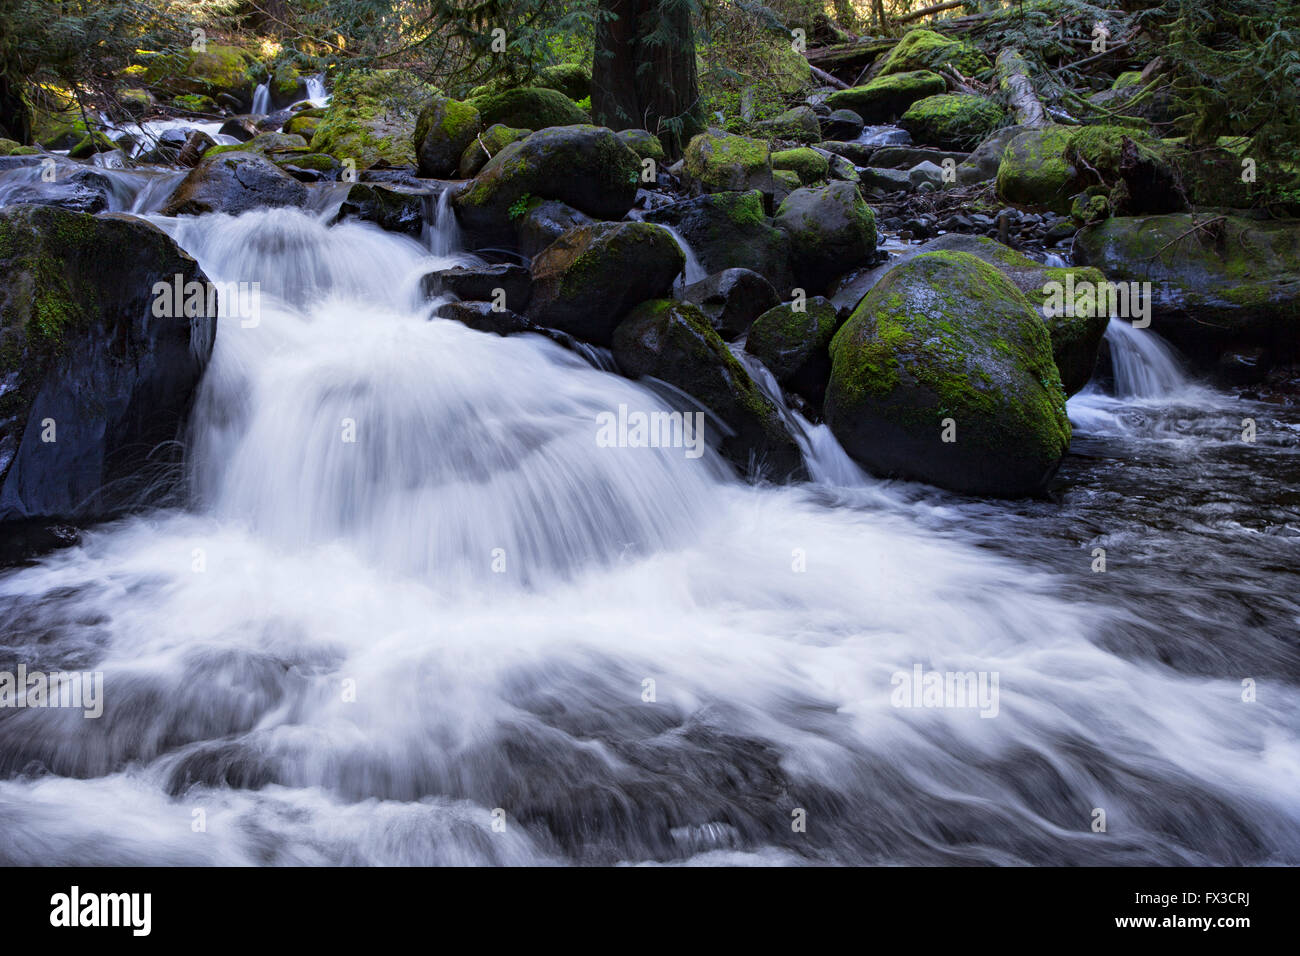 Water rushing over the rocks on its way to the waterfall at Multnomah Falls and eventually the Columbia River. Stock Photo